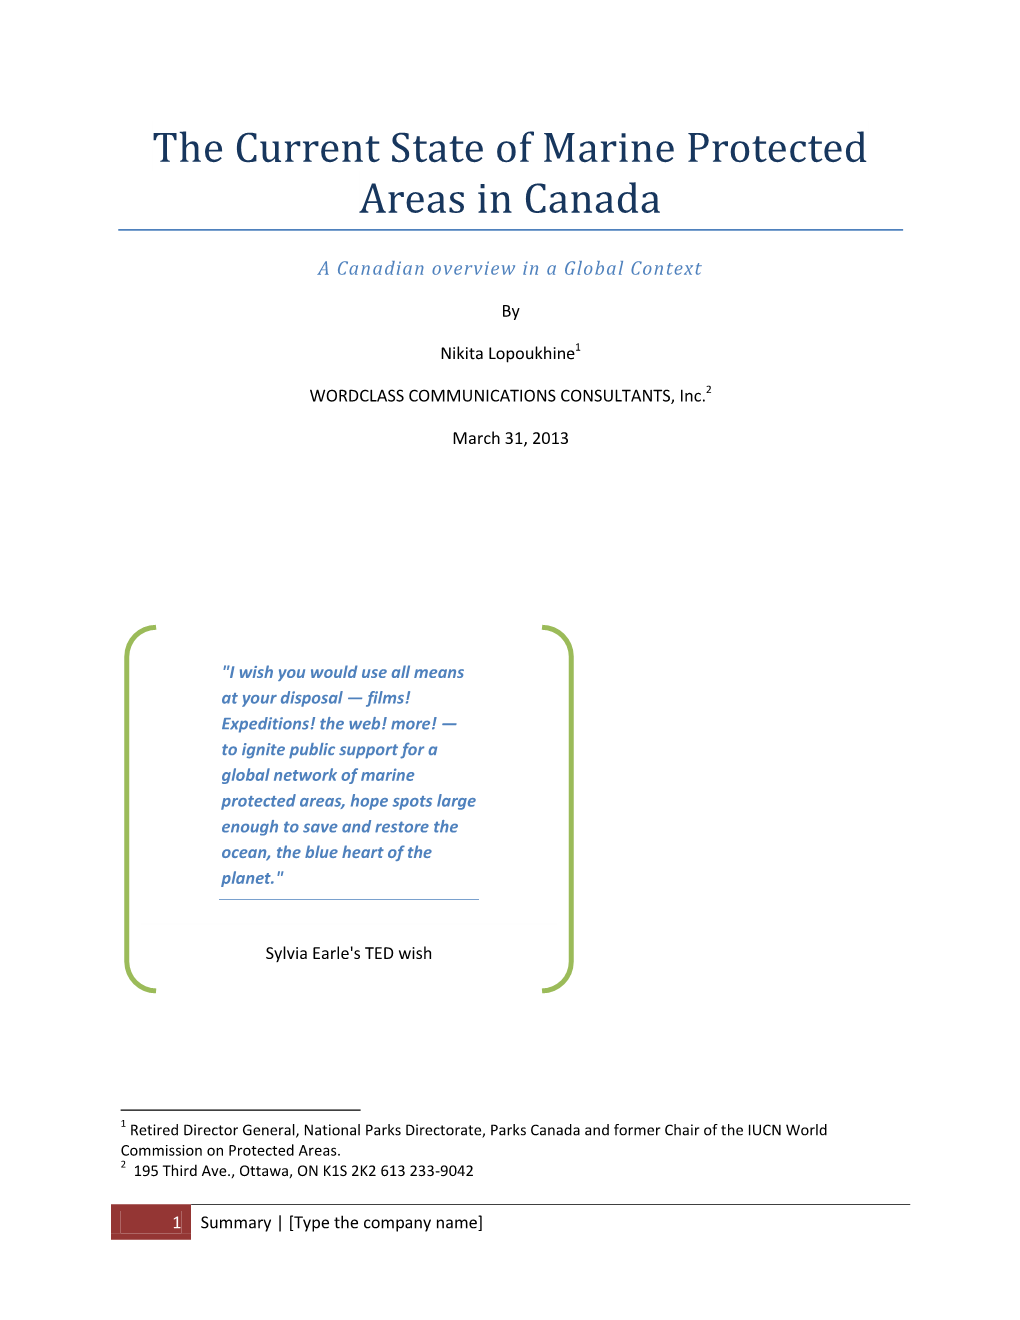 The Current State of Marine Protected Areas in Canada